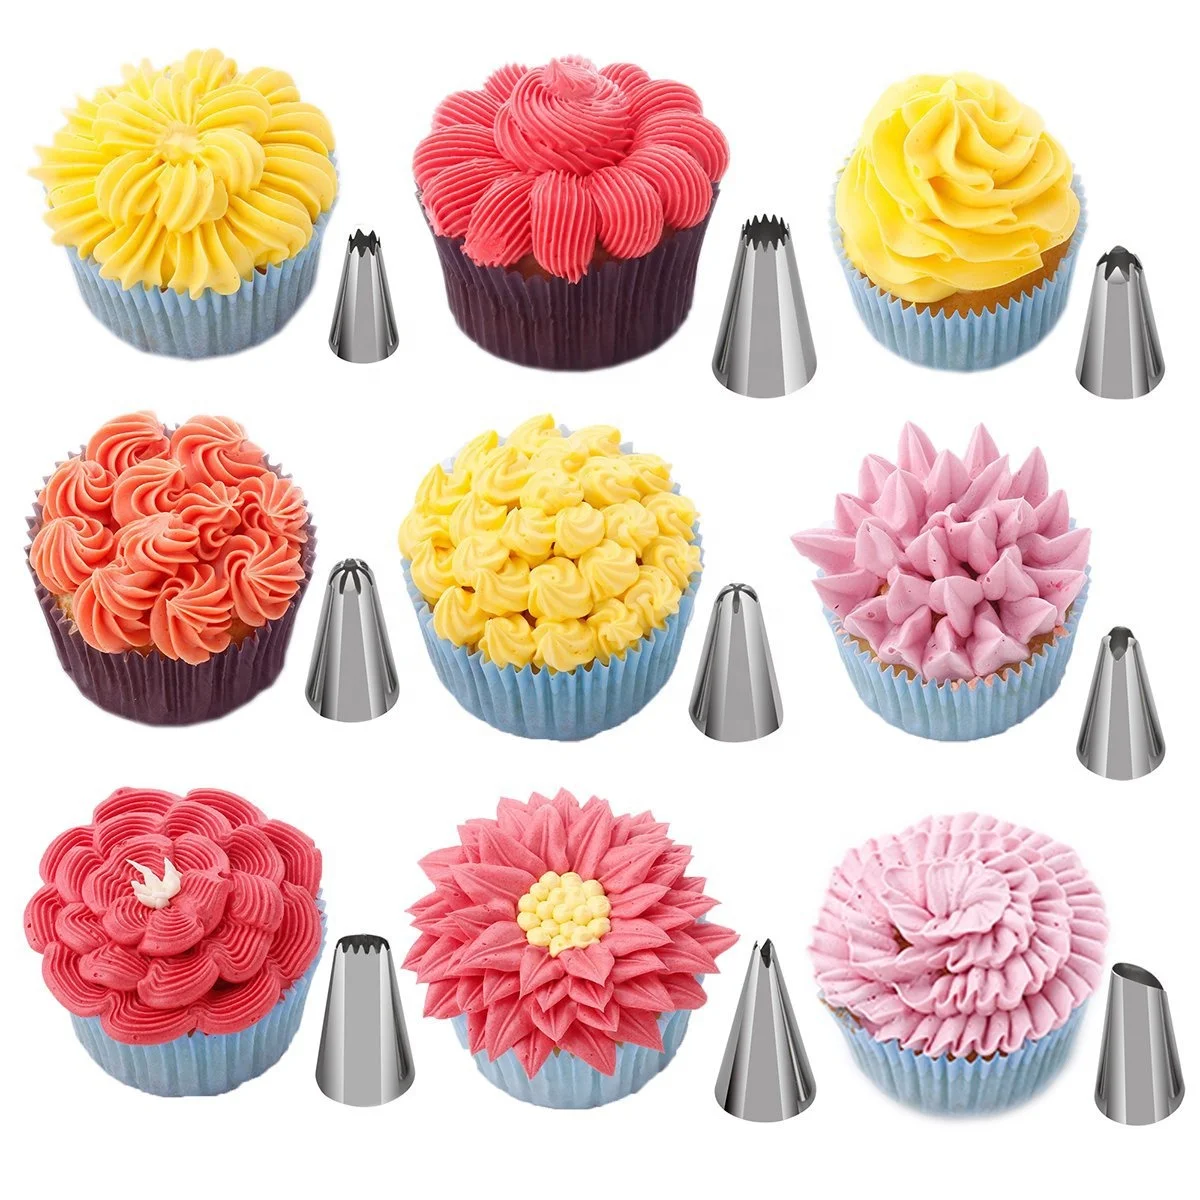 Silicone Kitchen Accessories Icing Piping Cream Pastry Bag 36 Stainless Steel Nozzle Set DIY Cake Decorating Tips Set